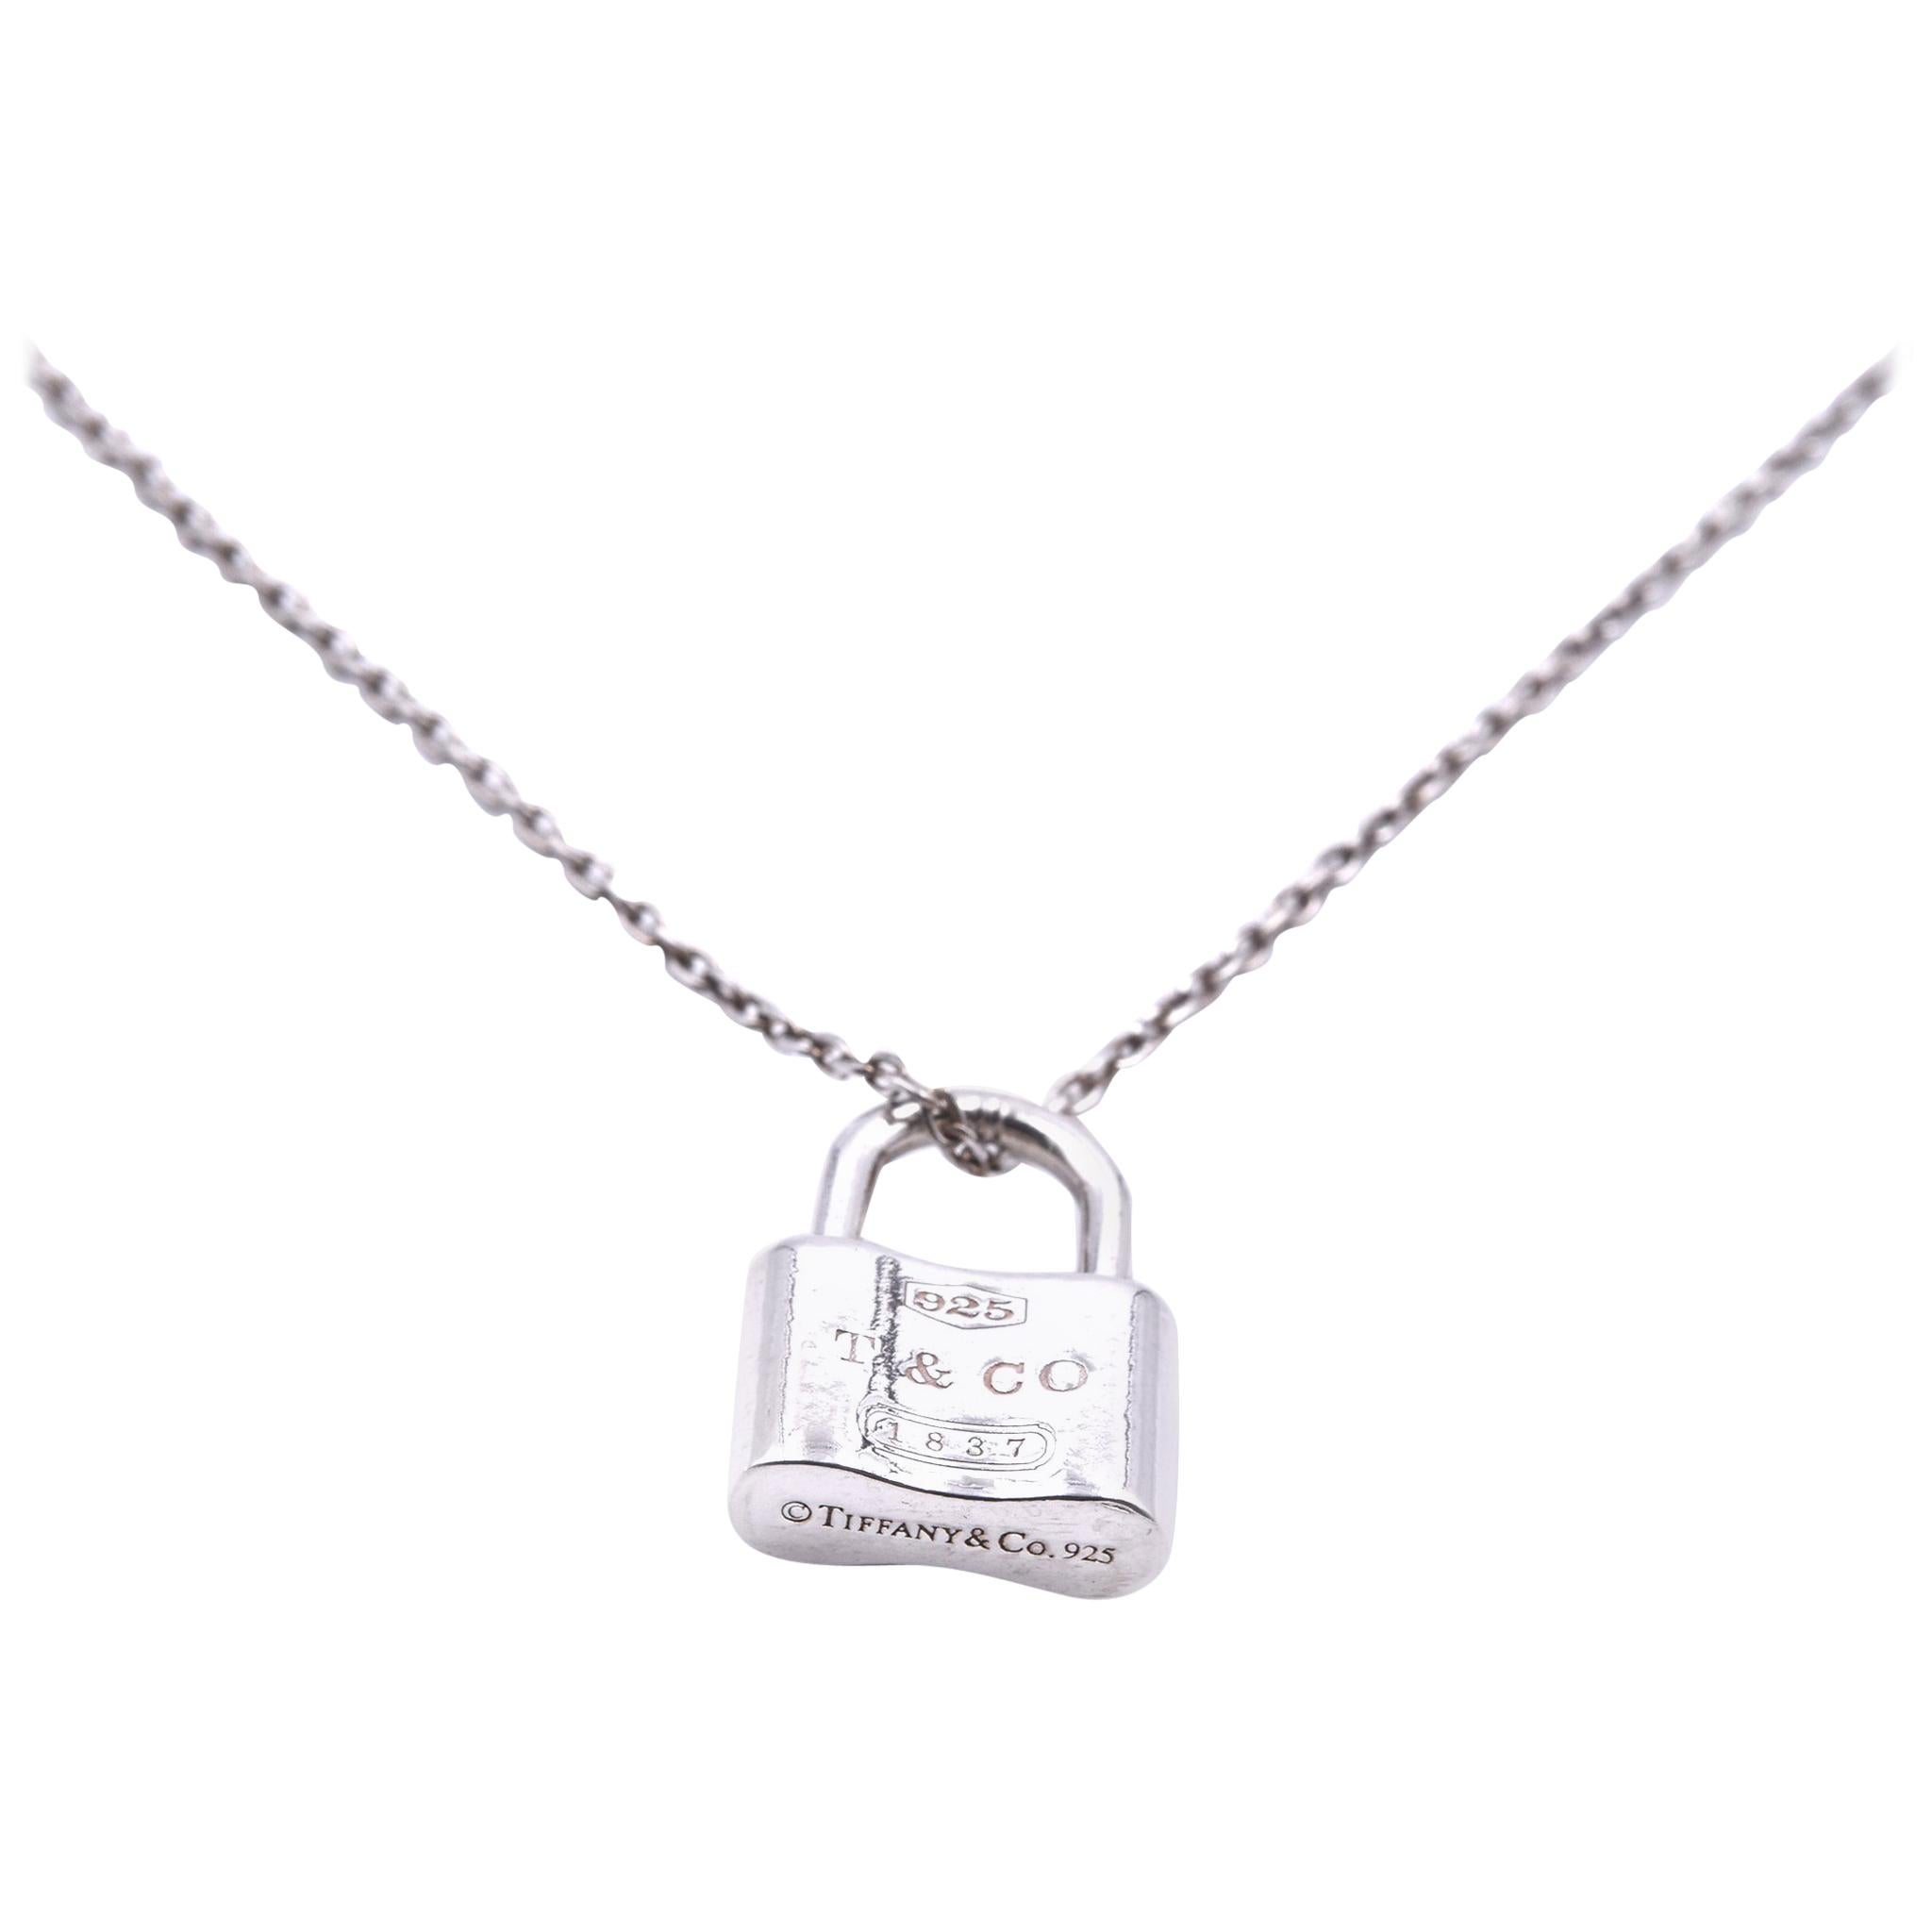 RePLAY  PADLOCK NECKLACE silver925 ネックレス アクセサリー メンズ 激安クリアランス